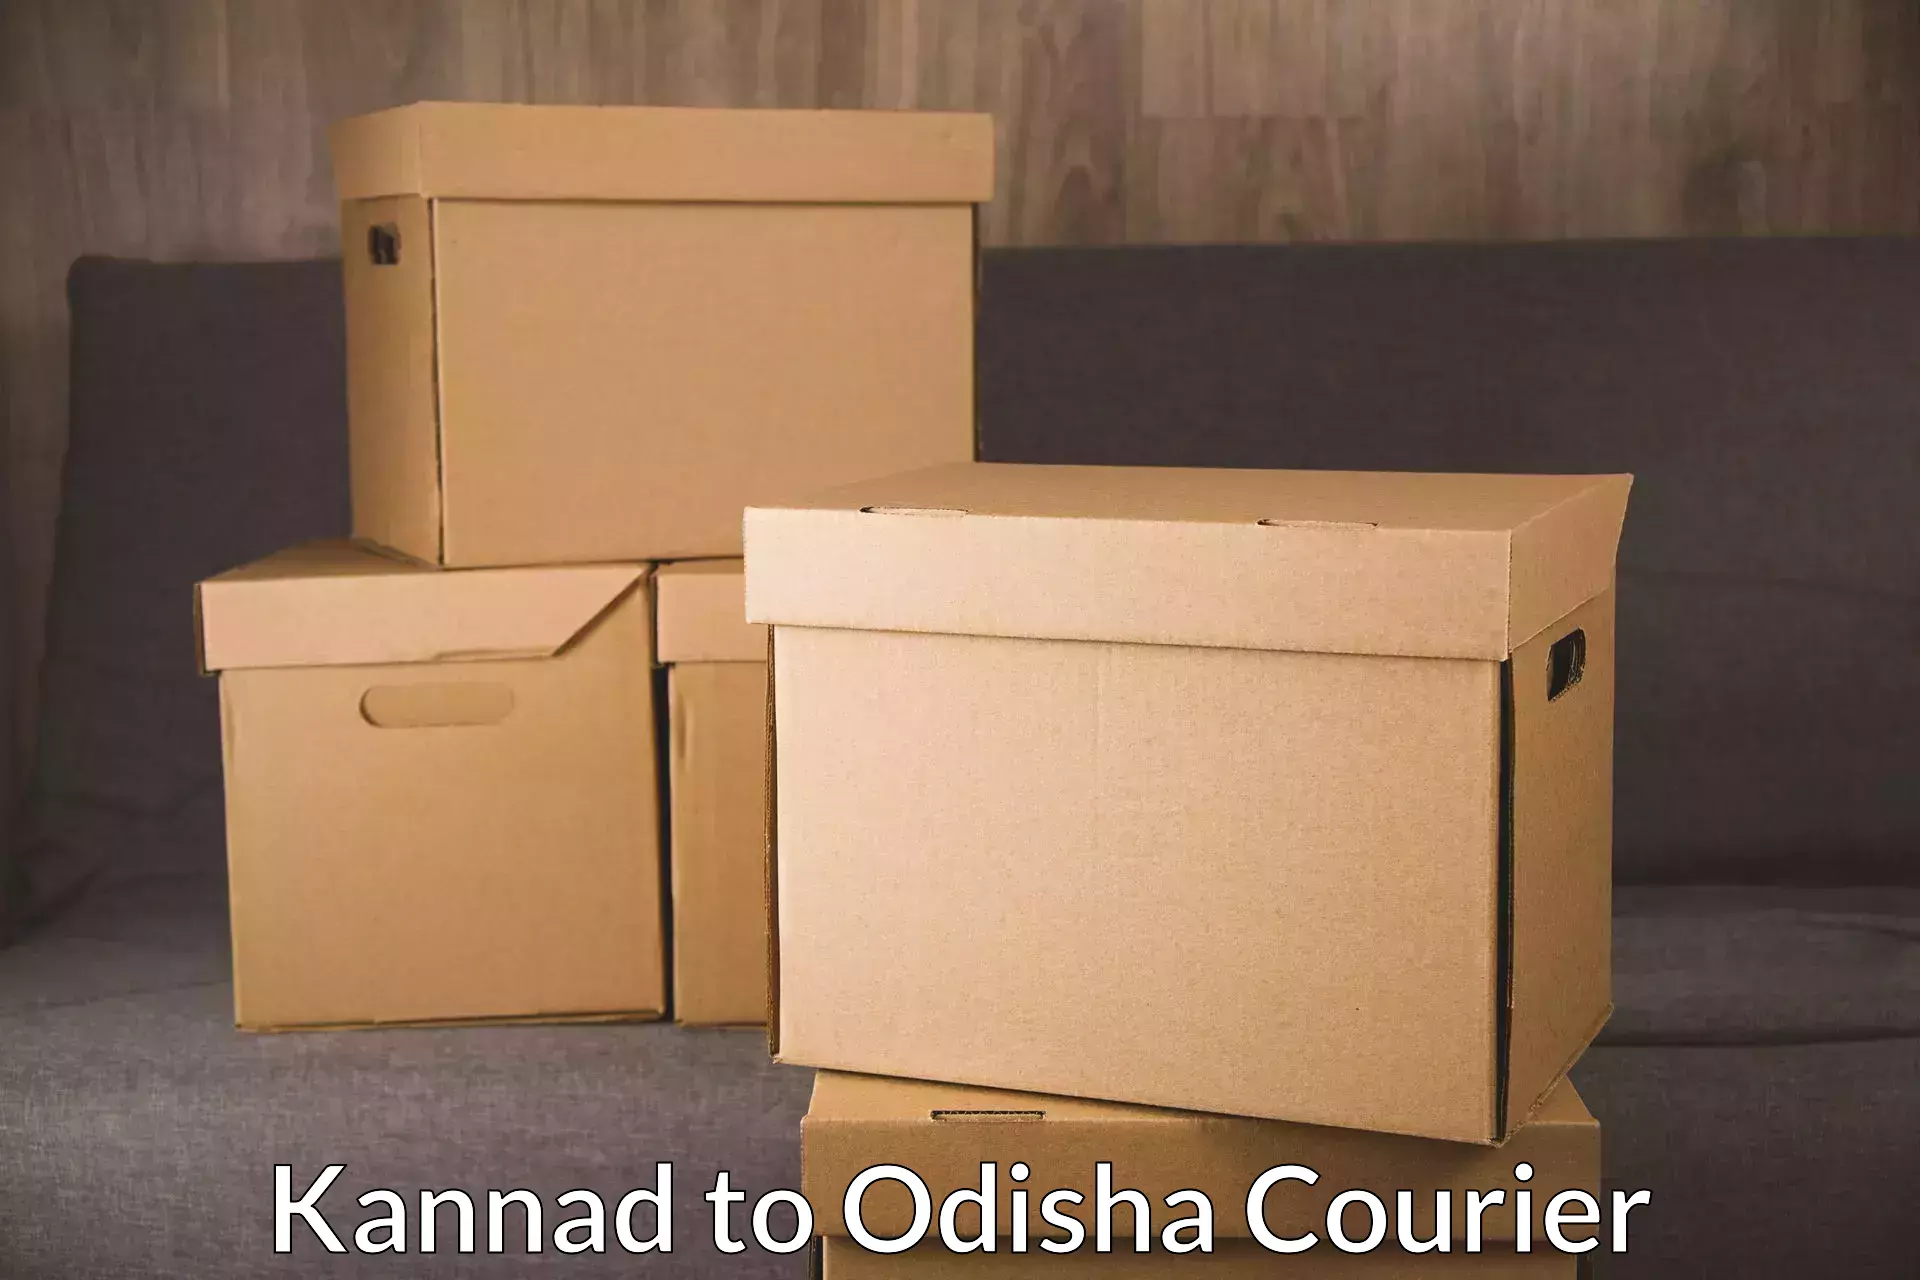 Courier service innovation Kannad to Asika